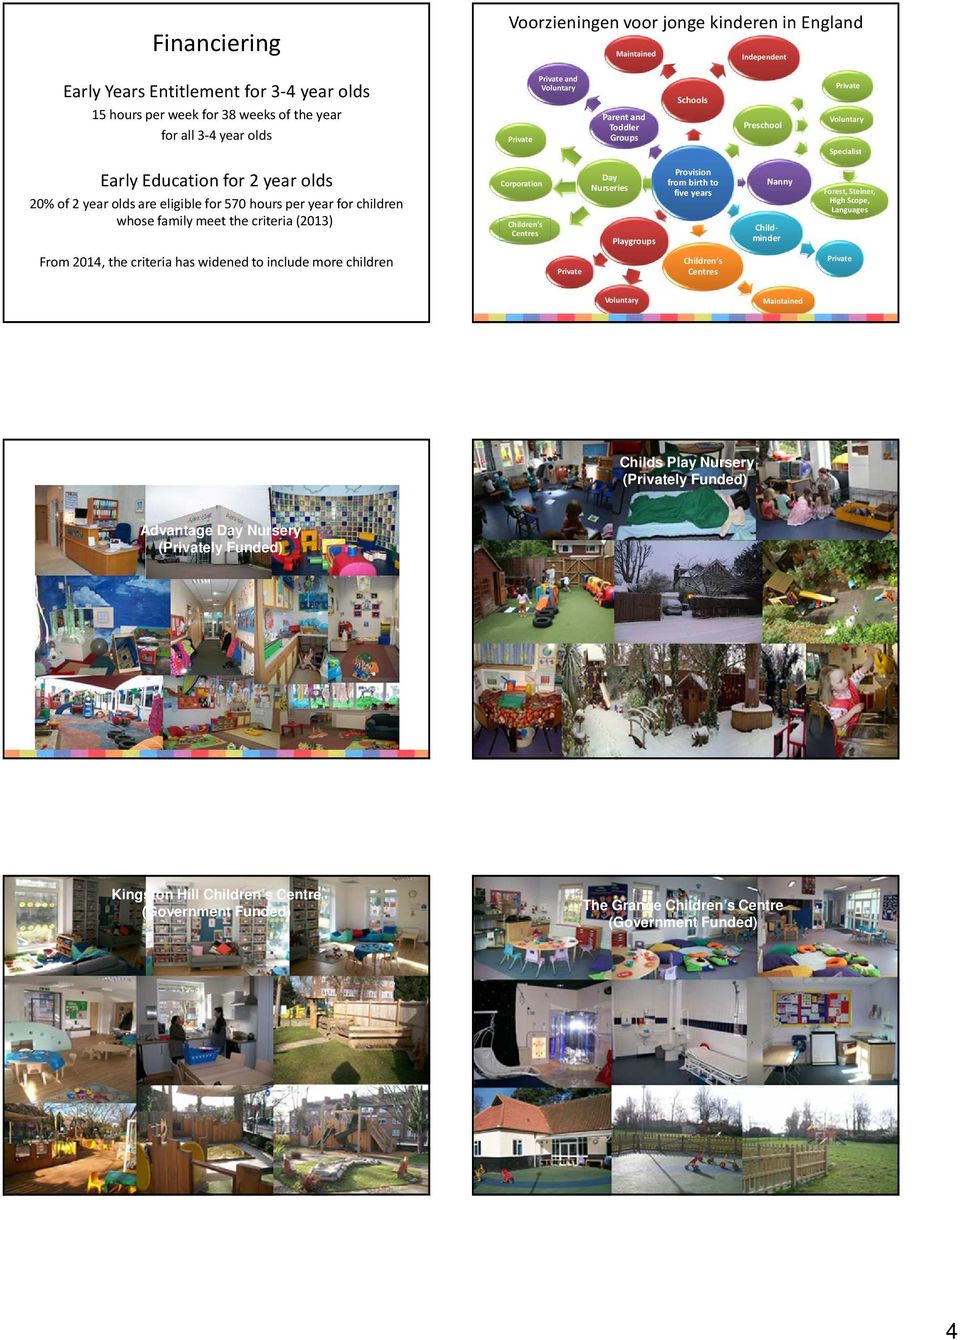 criteria (2013) Corporation Children s Centres Day Nurseries Playgroups Provision from birth to five years Nanny Childminder Forest, Steiner, High Scope, Languages From 2014, the criteria has widened